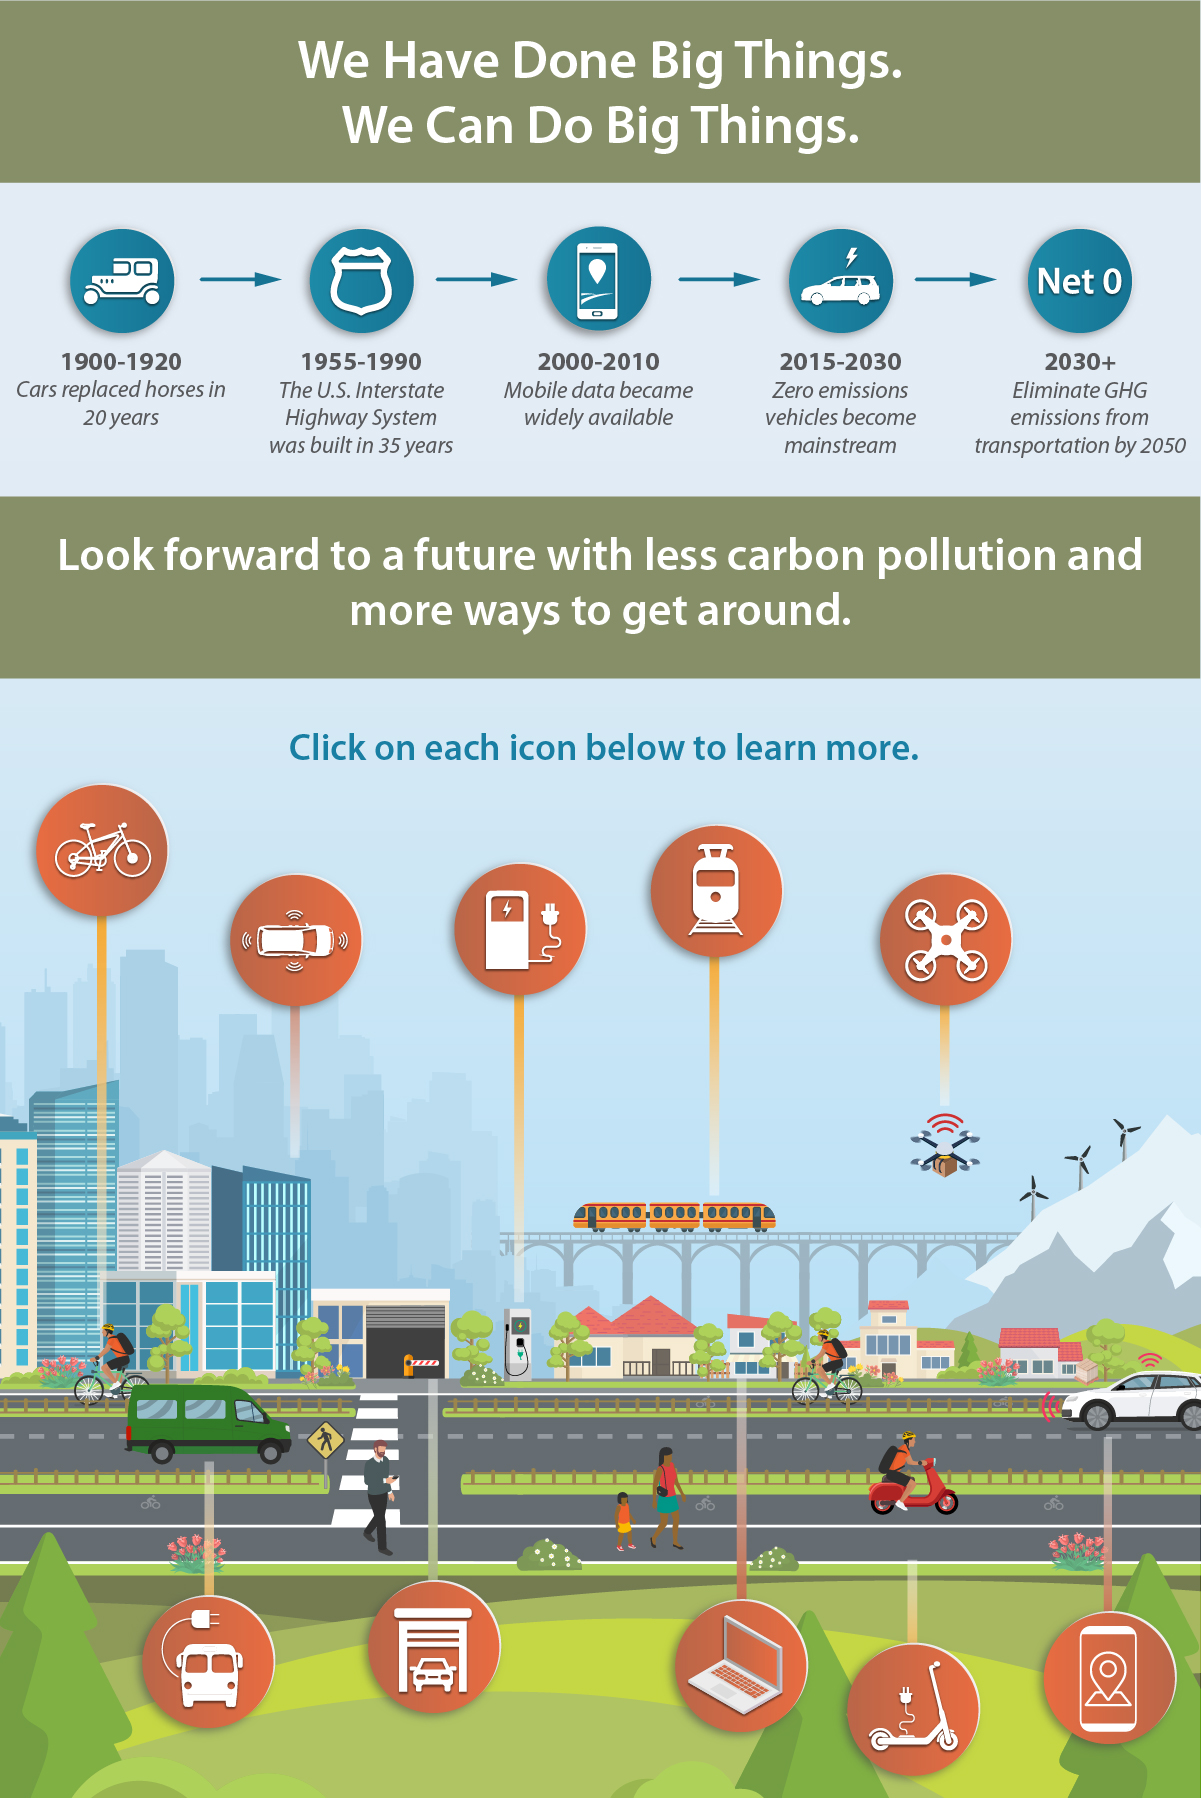 Clickable infographic about what we have done and can do to reduce carbon pollution from transportation